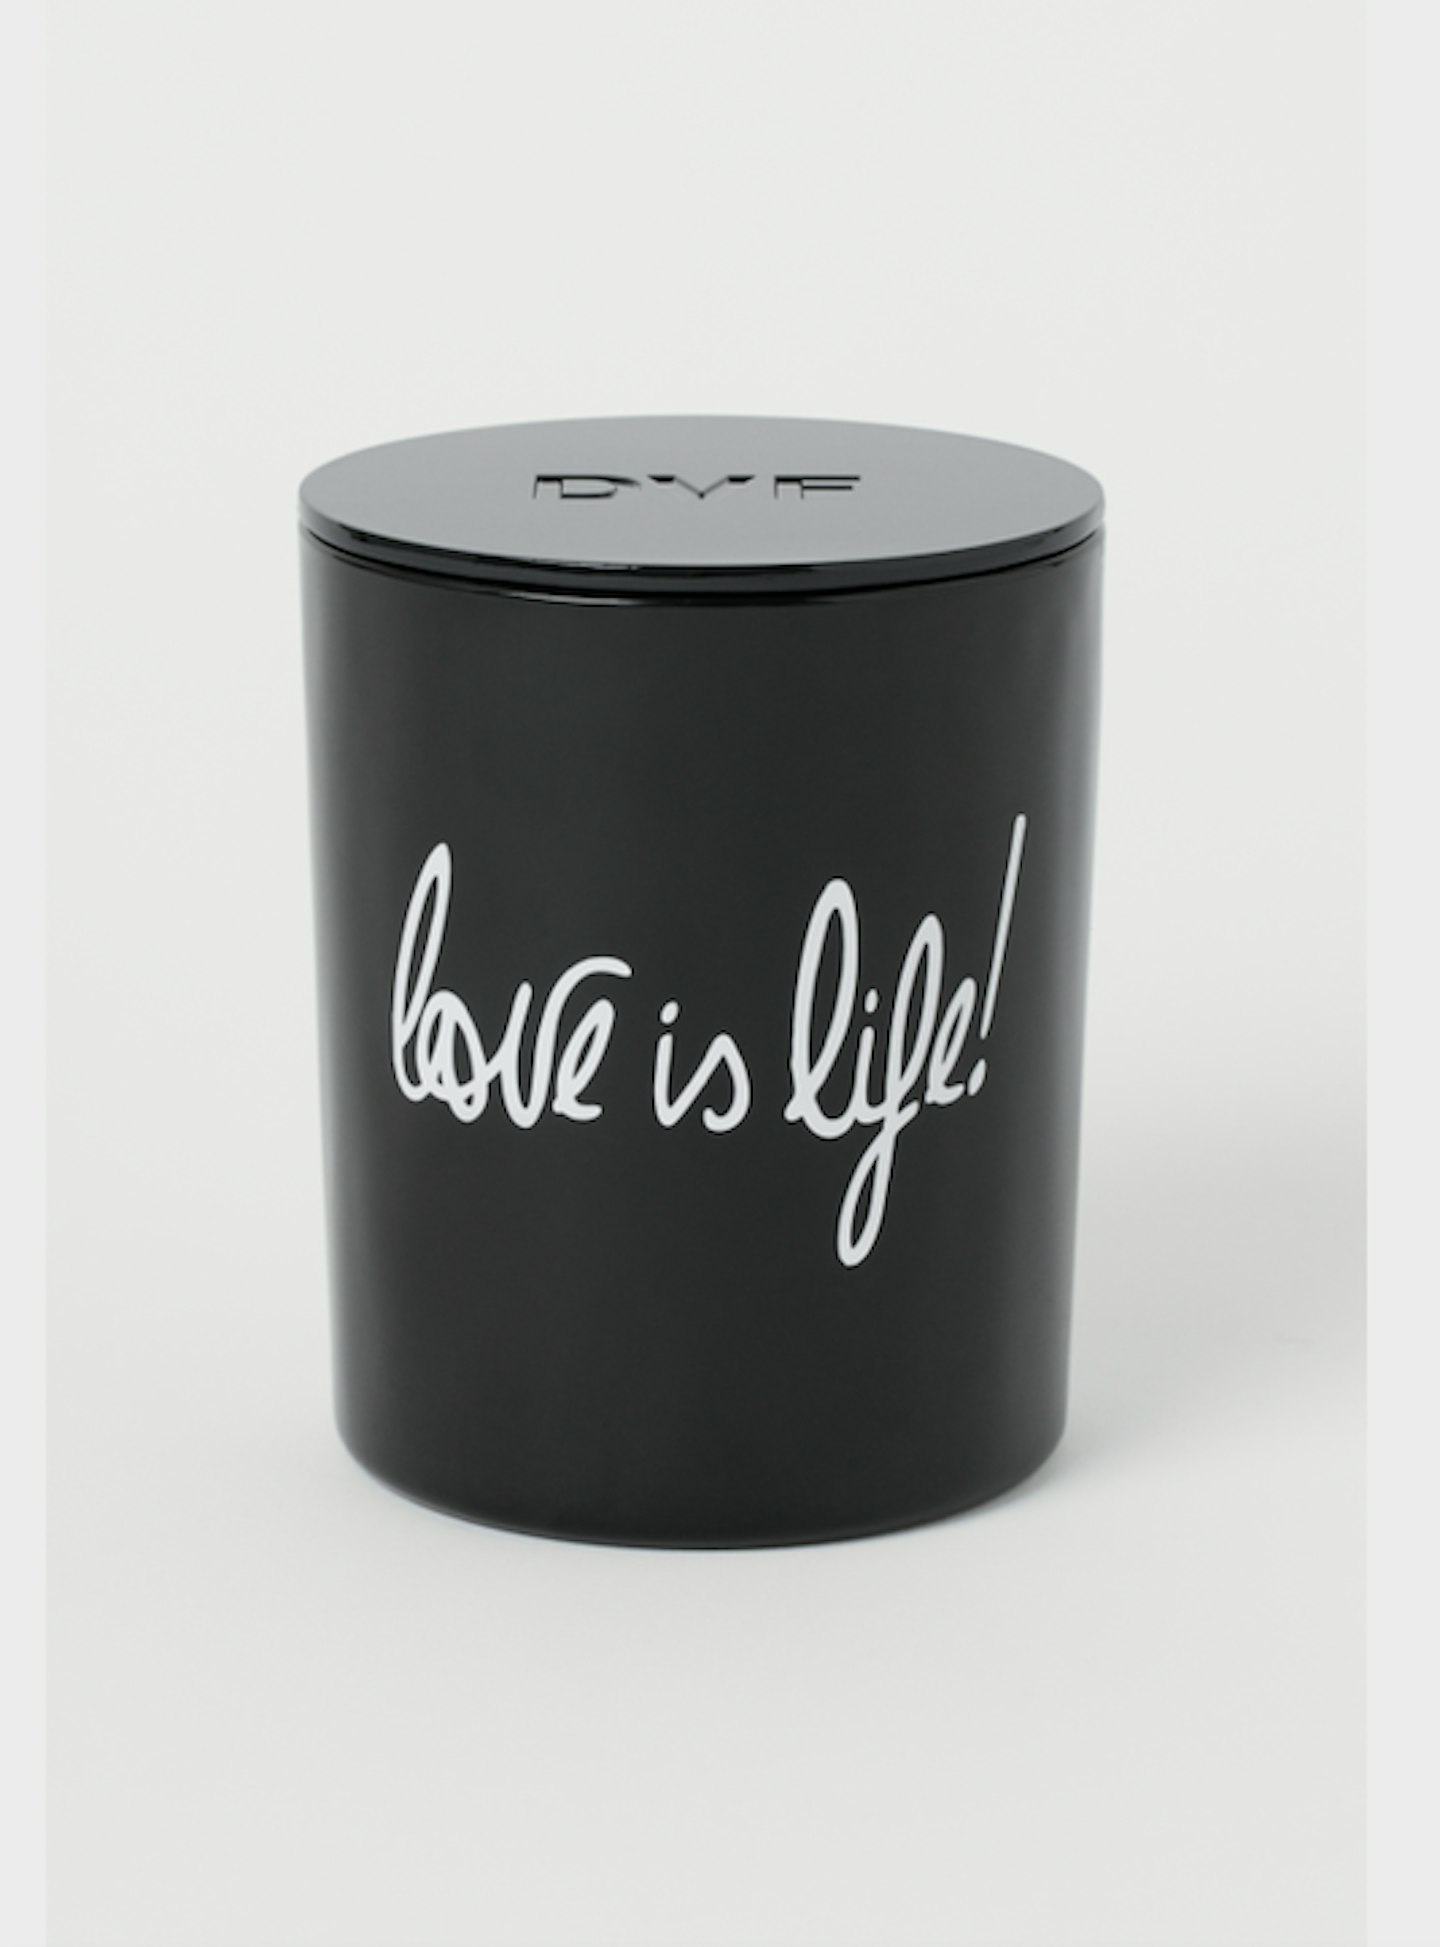 'Love is Life' Candle, £24.99